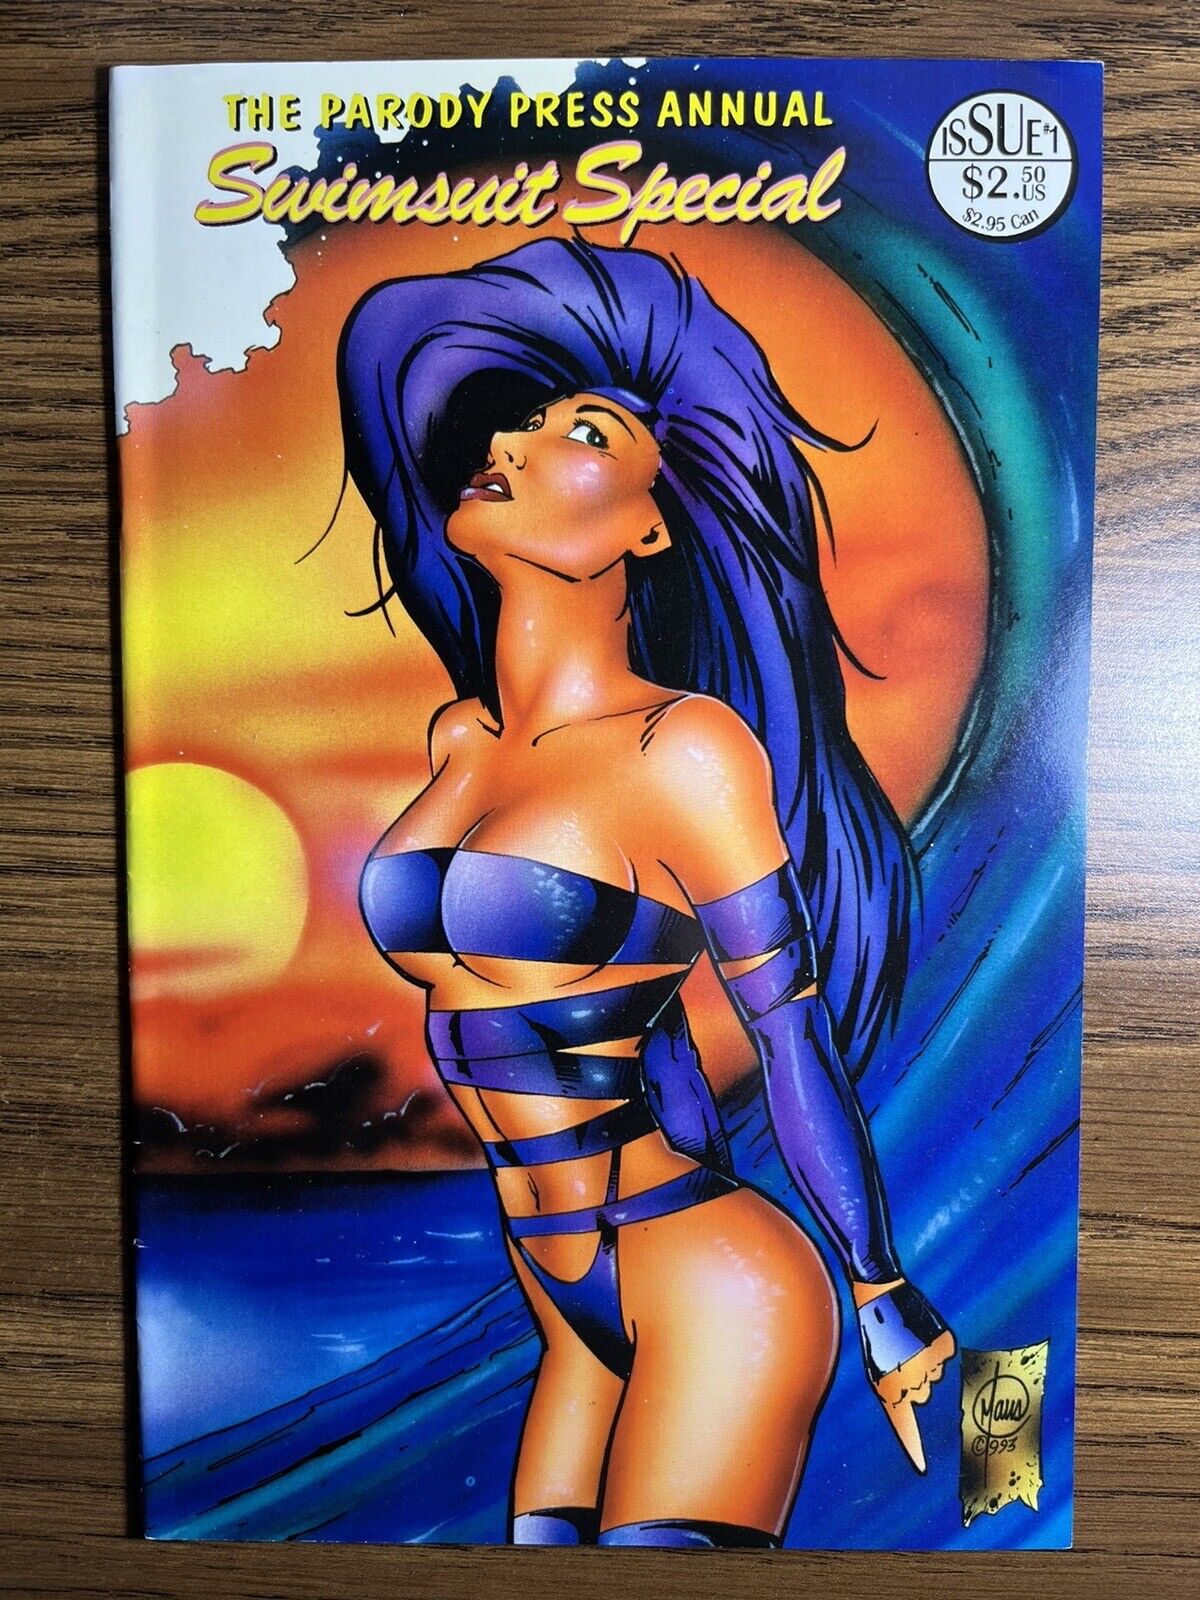 THE PARODY PRESS ANNUAL SWIMSUIT SPECIAL 1 GORGEOUS BILL MAUS COVER 1993 RARE